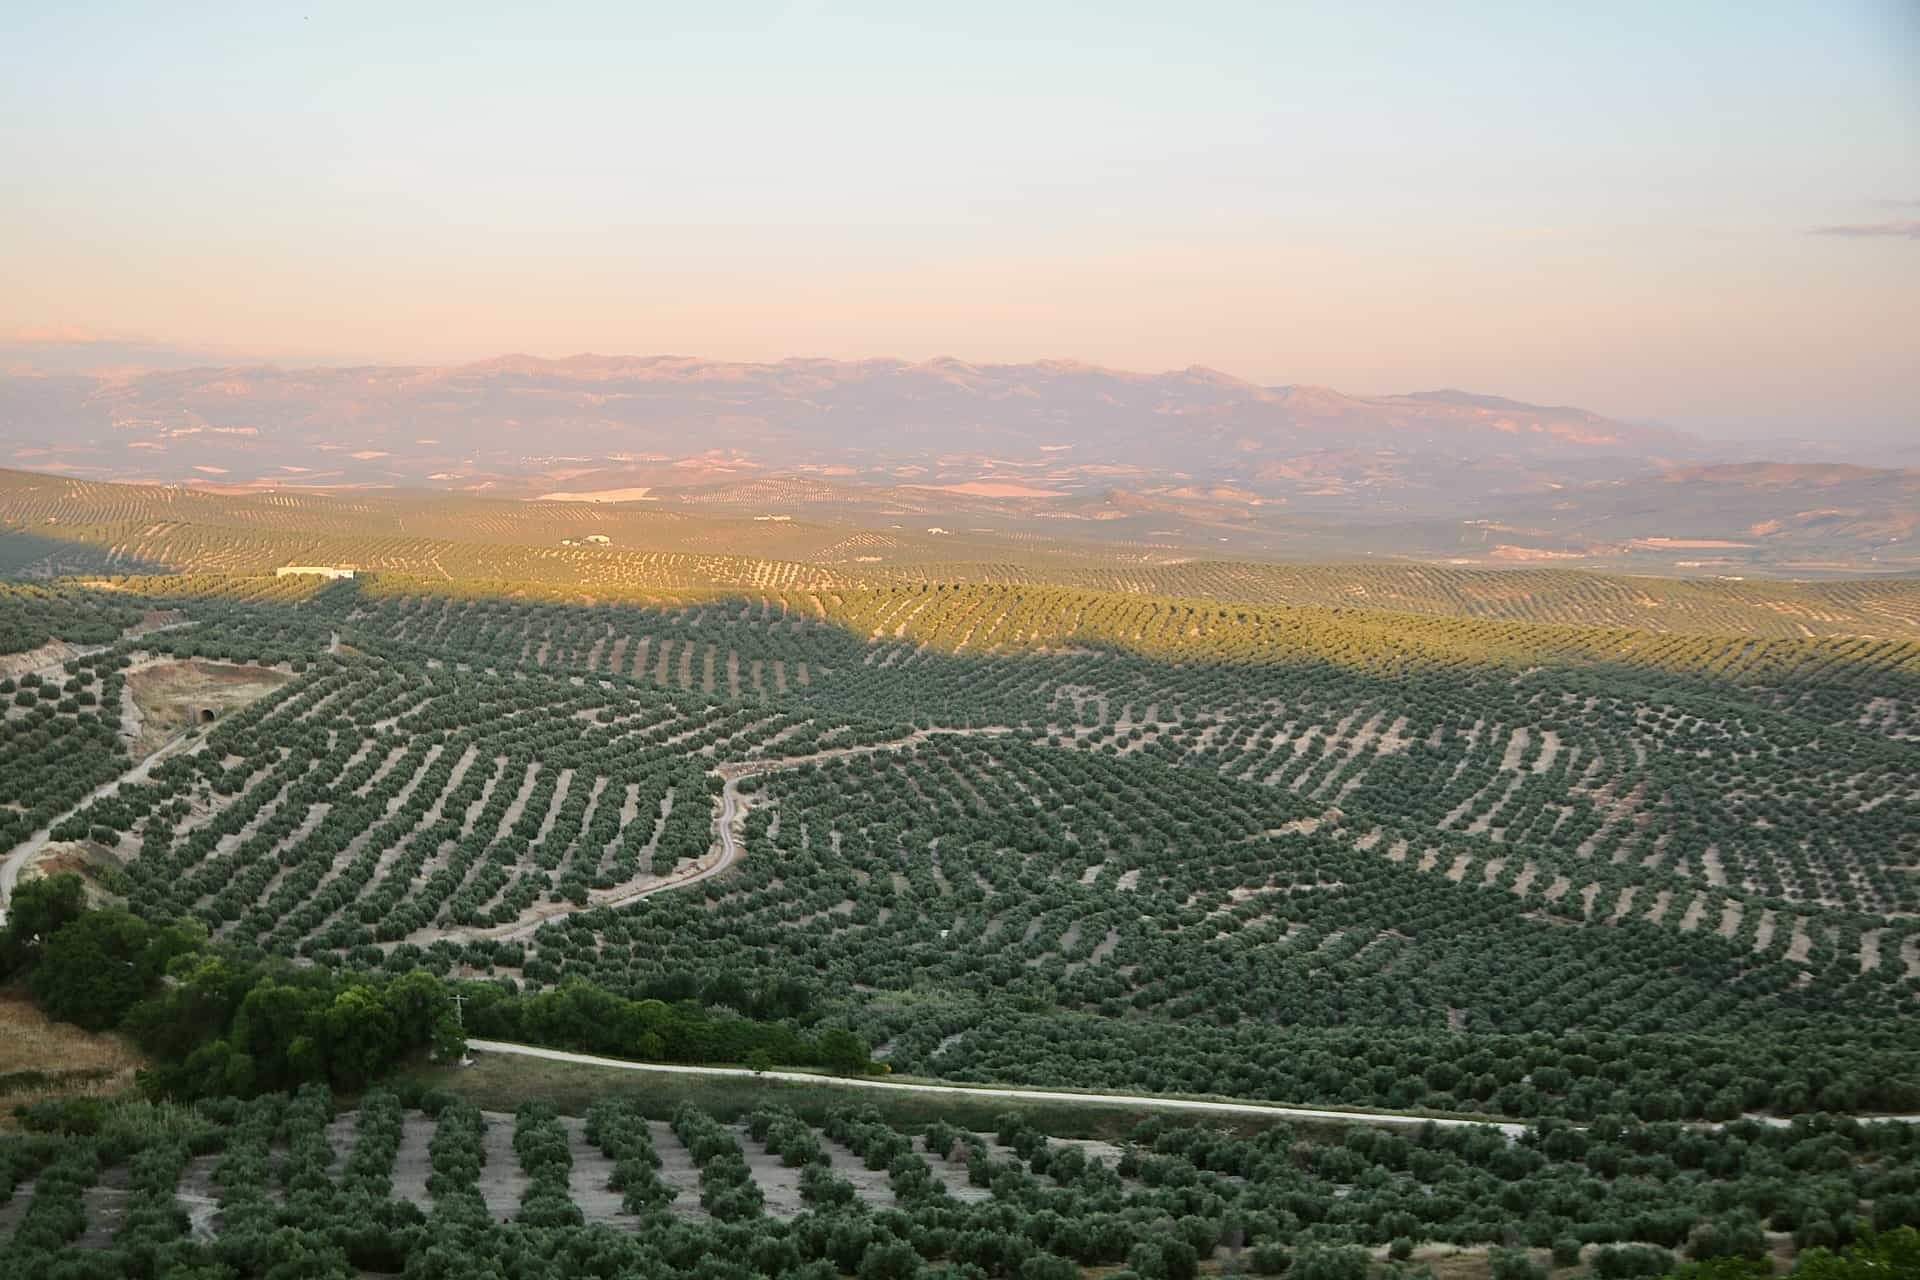 Spain has the biggest olive oil production in the world.